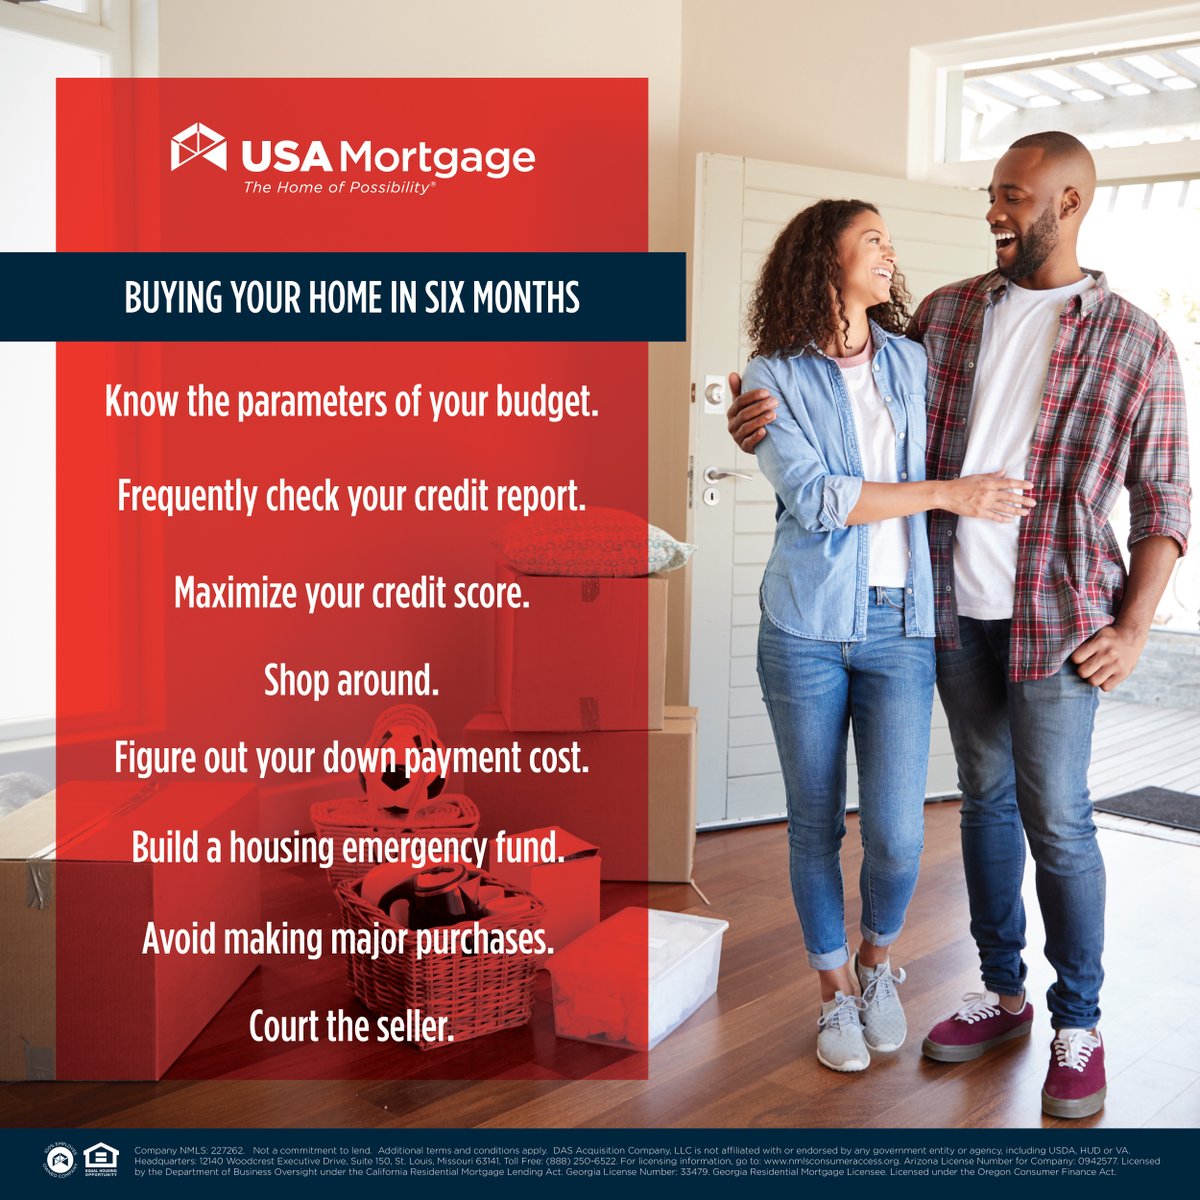 If you are looking to purchase a home within the next 6 months, you should begin to tidy up your finances in preparation! Making sure you're prepared ahead of time will make the entire mortgage process a lot easier once you do get started! 💪